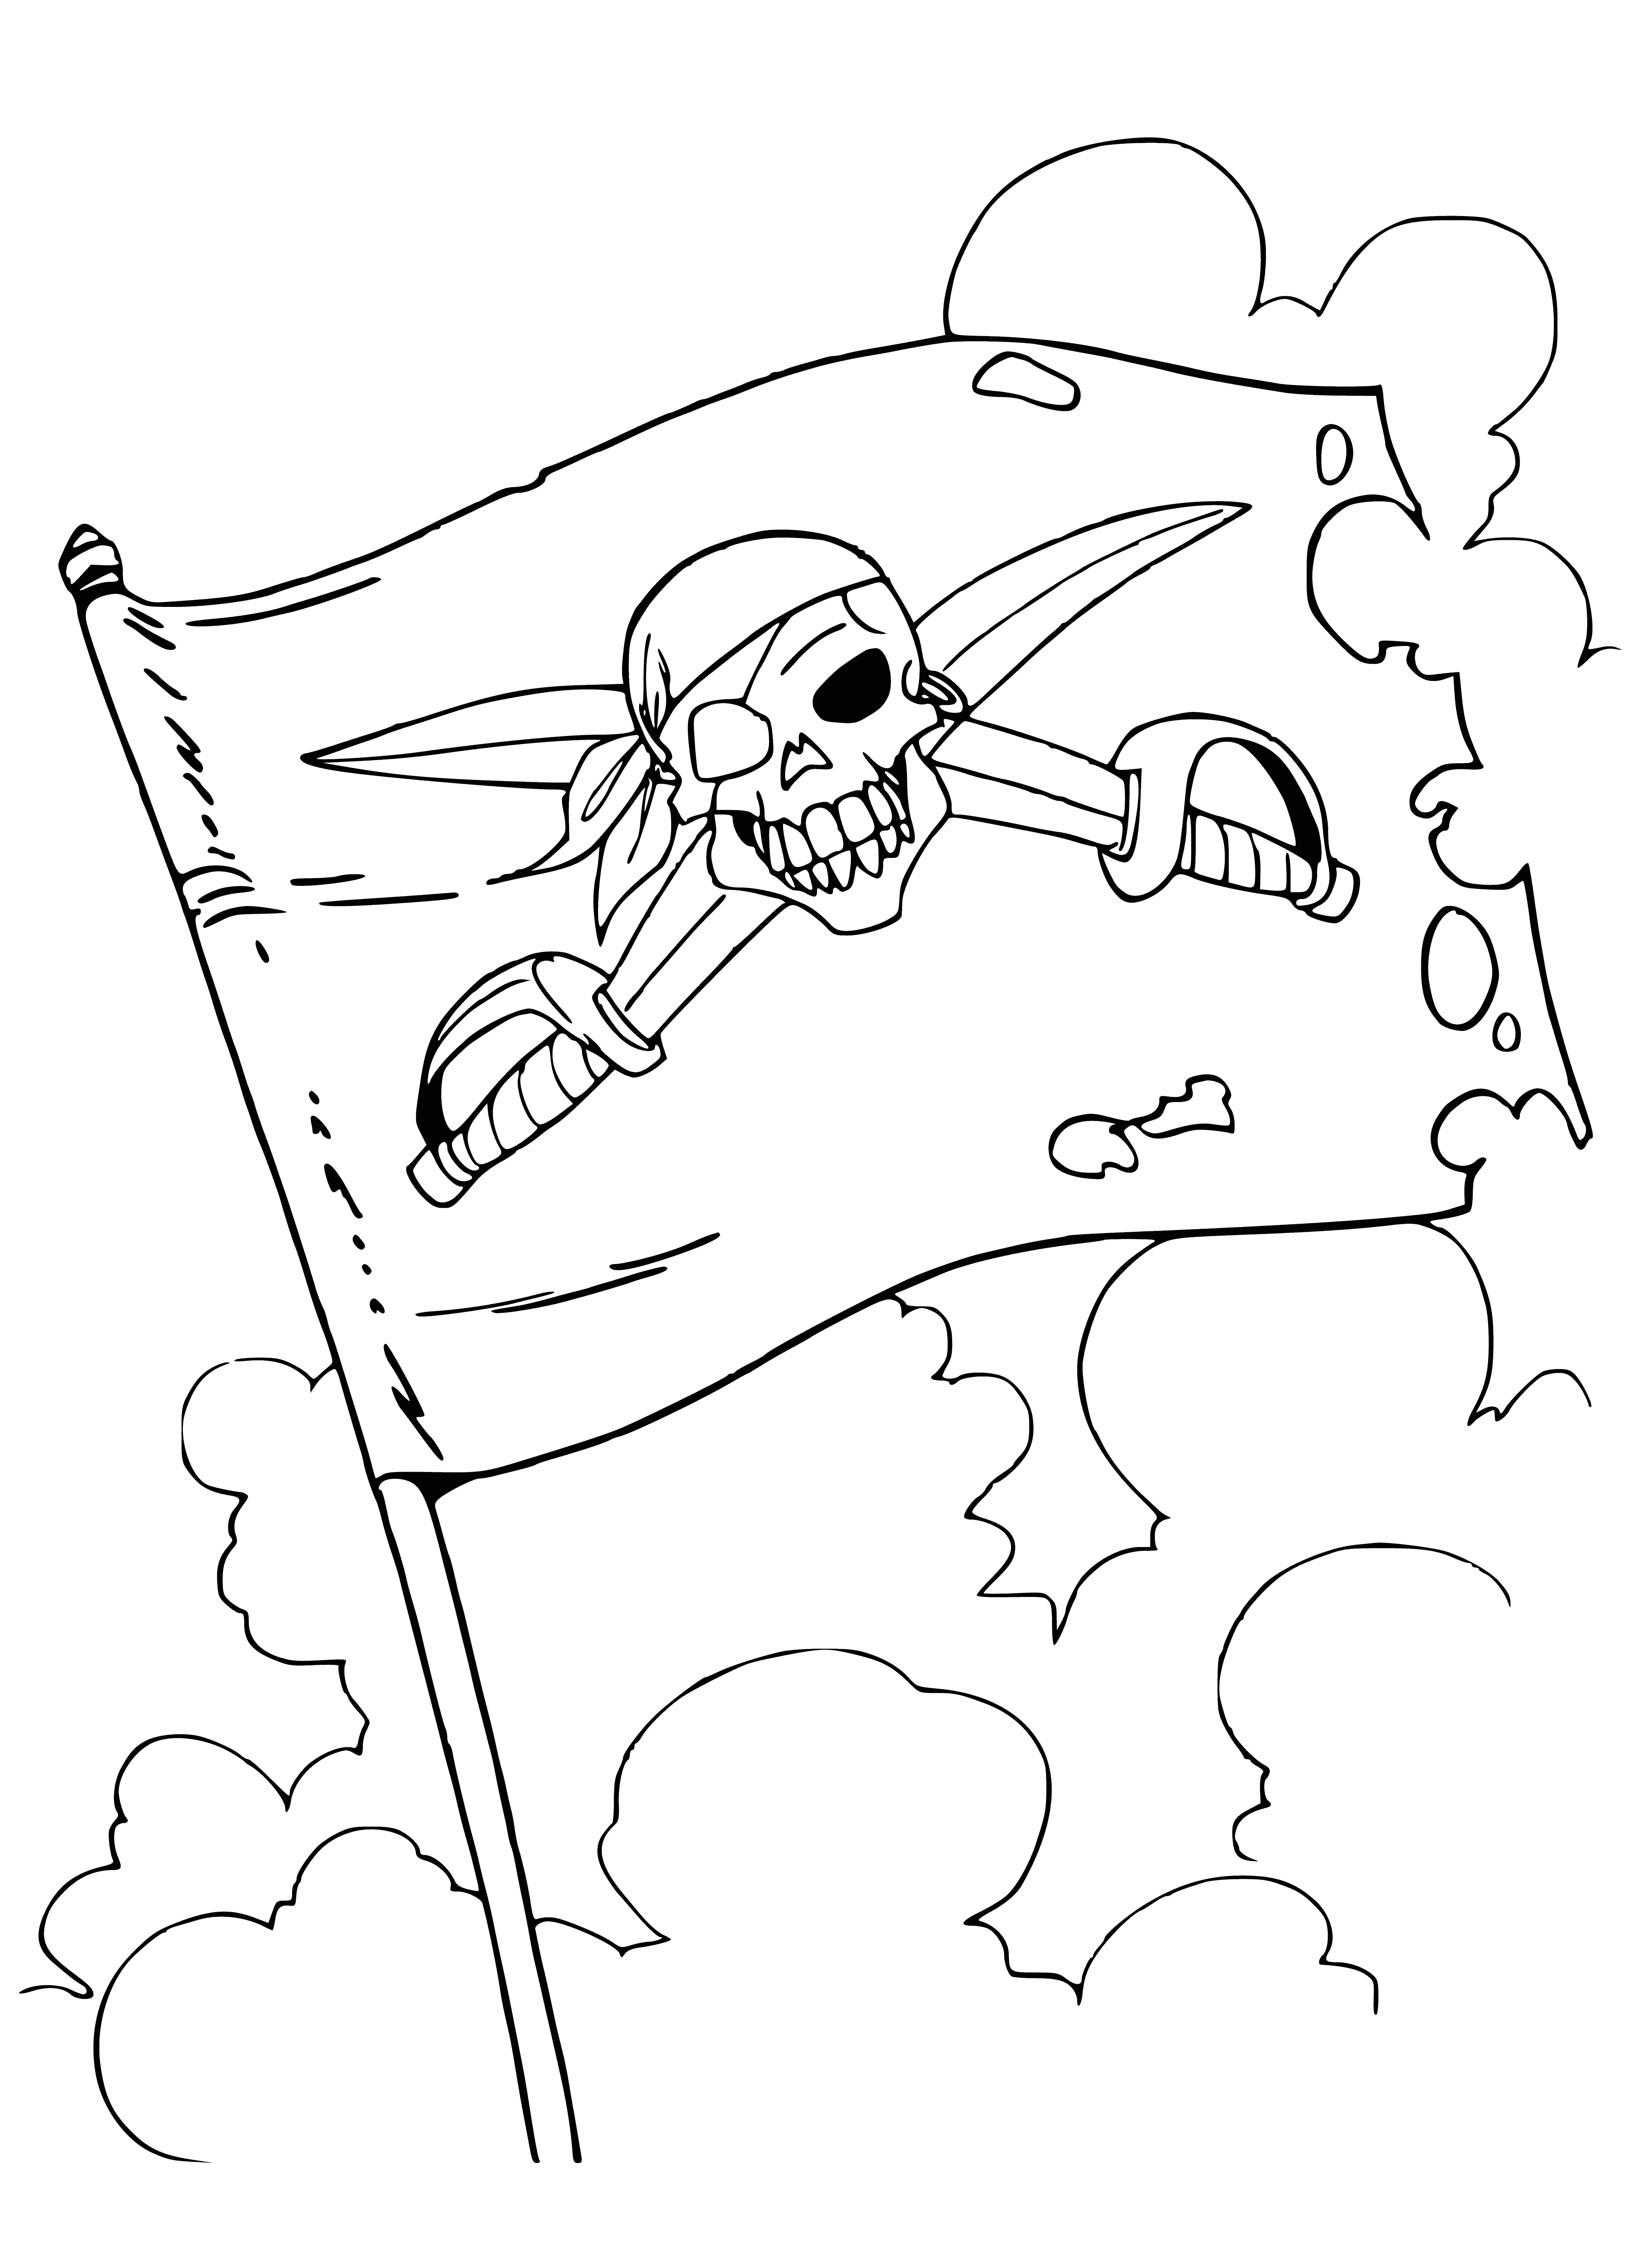 Jolly Roger coloring page